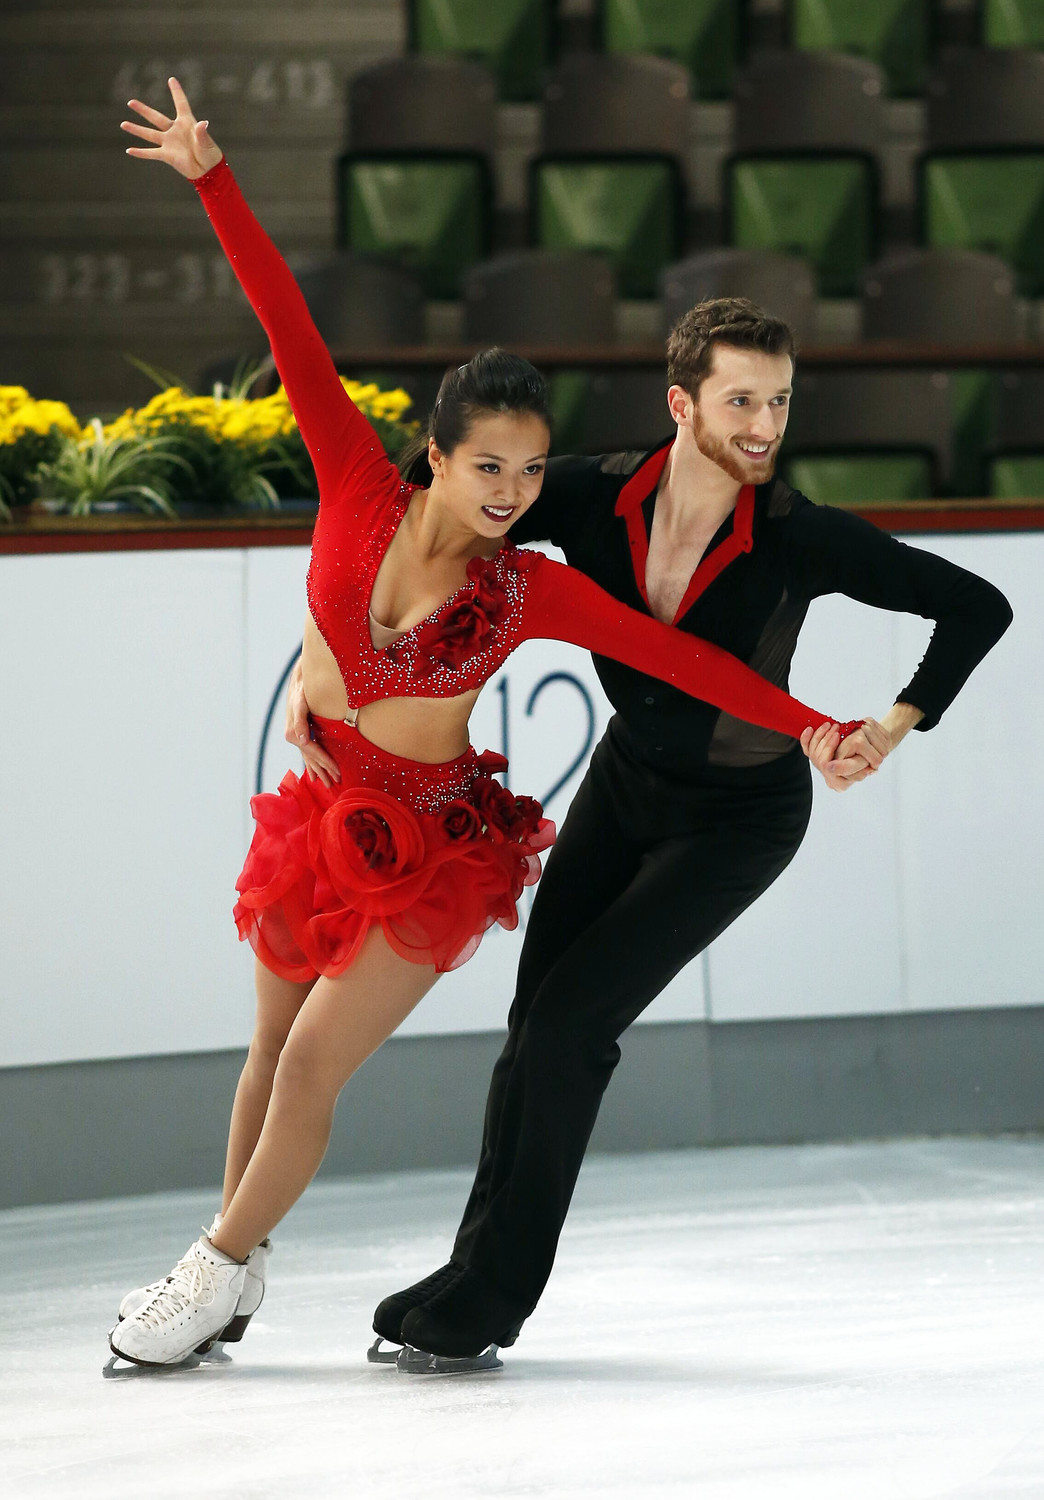 Representing South Korea, Alex Gamelin, formerly of North Merrick, and his partner, Yura Min, of South Korea, will compete in ice dancing in the Winter Olympics.